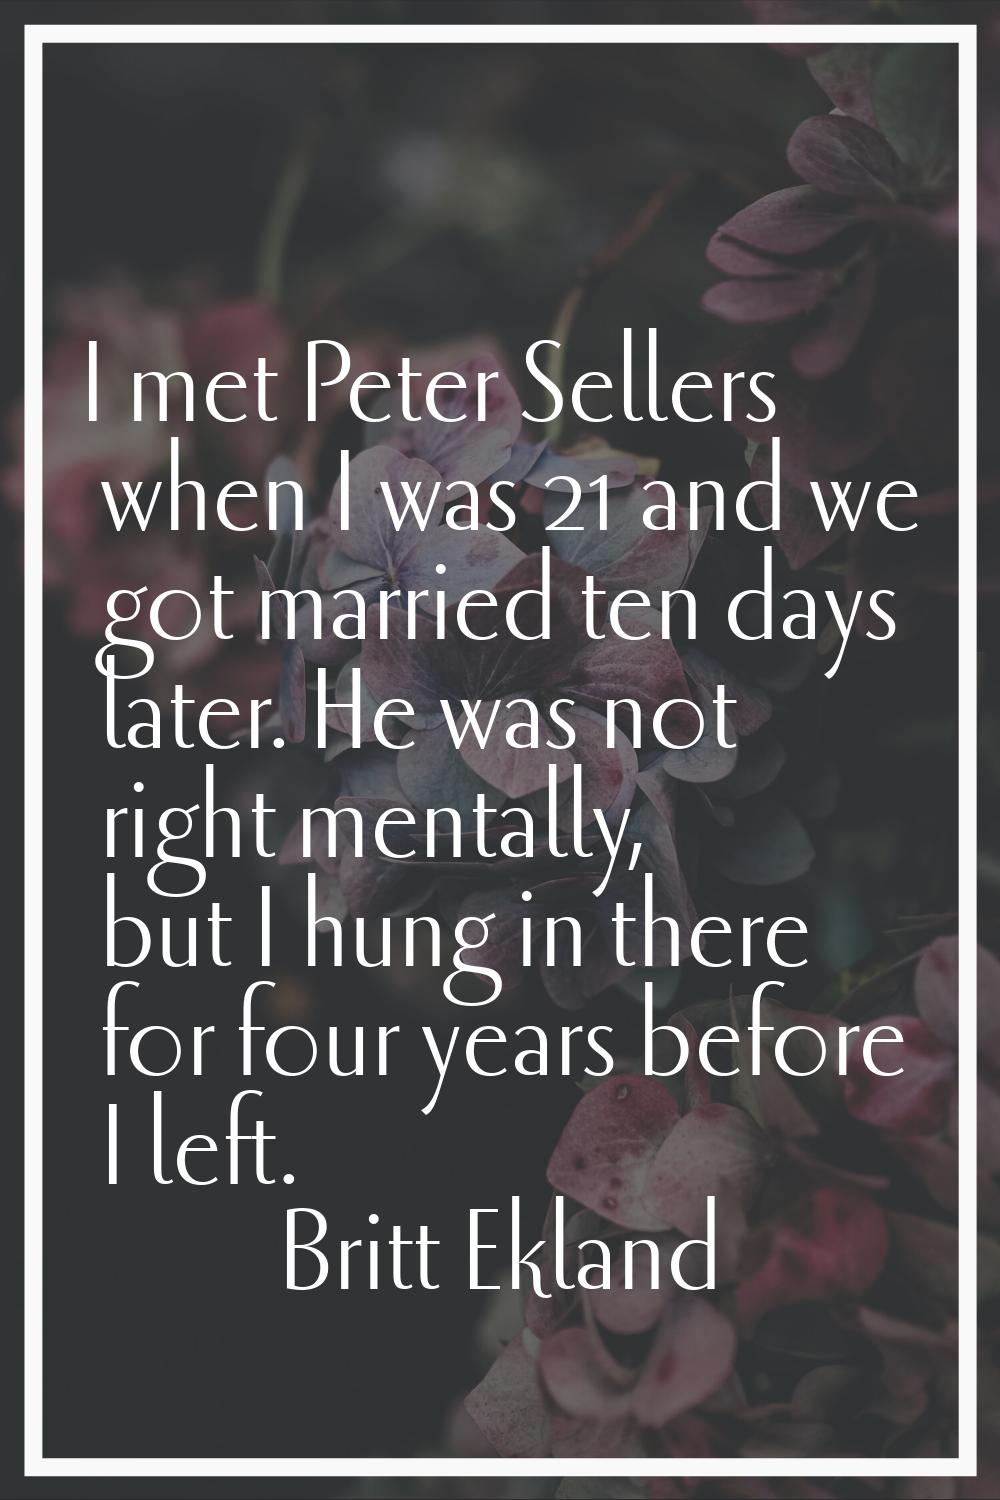 I met Peter Sellers when I was 21 and we got married ten days later. He was not right mentally, but